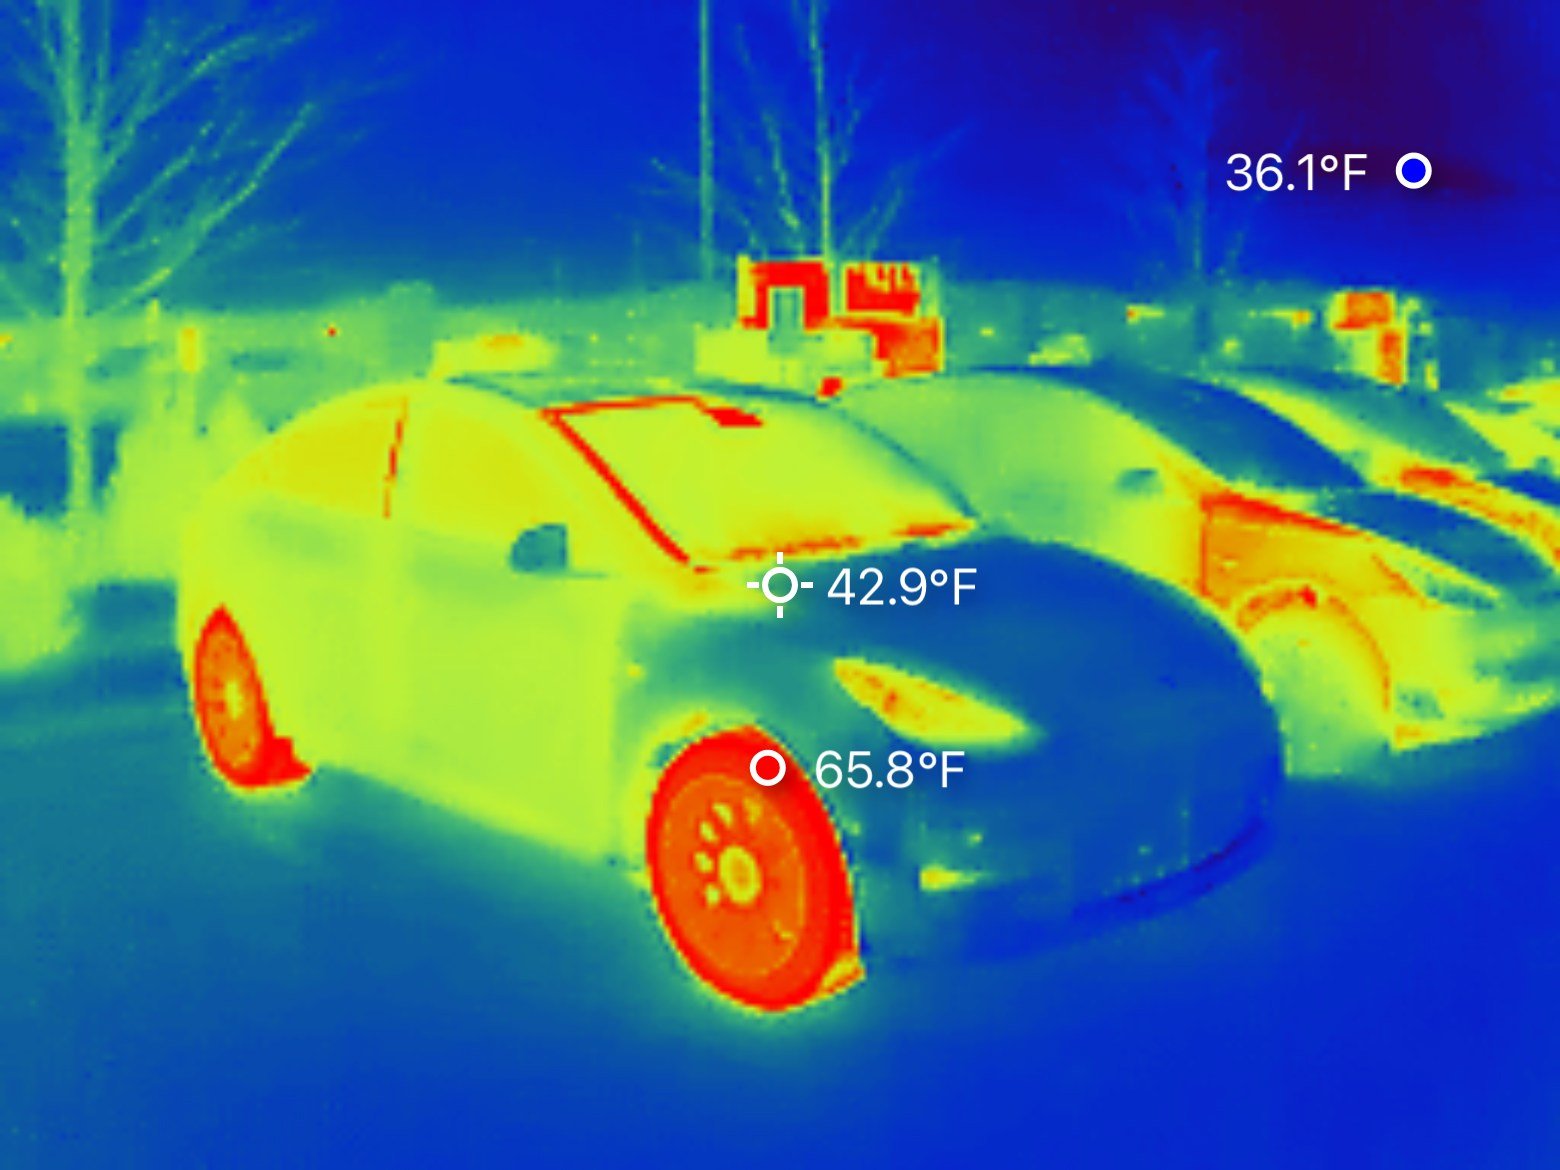 Model Y at Supercharger thermal image